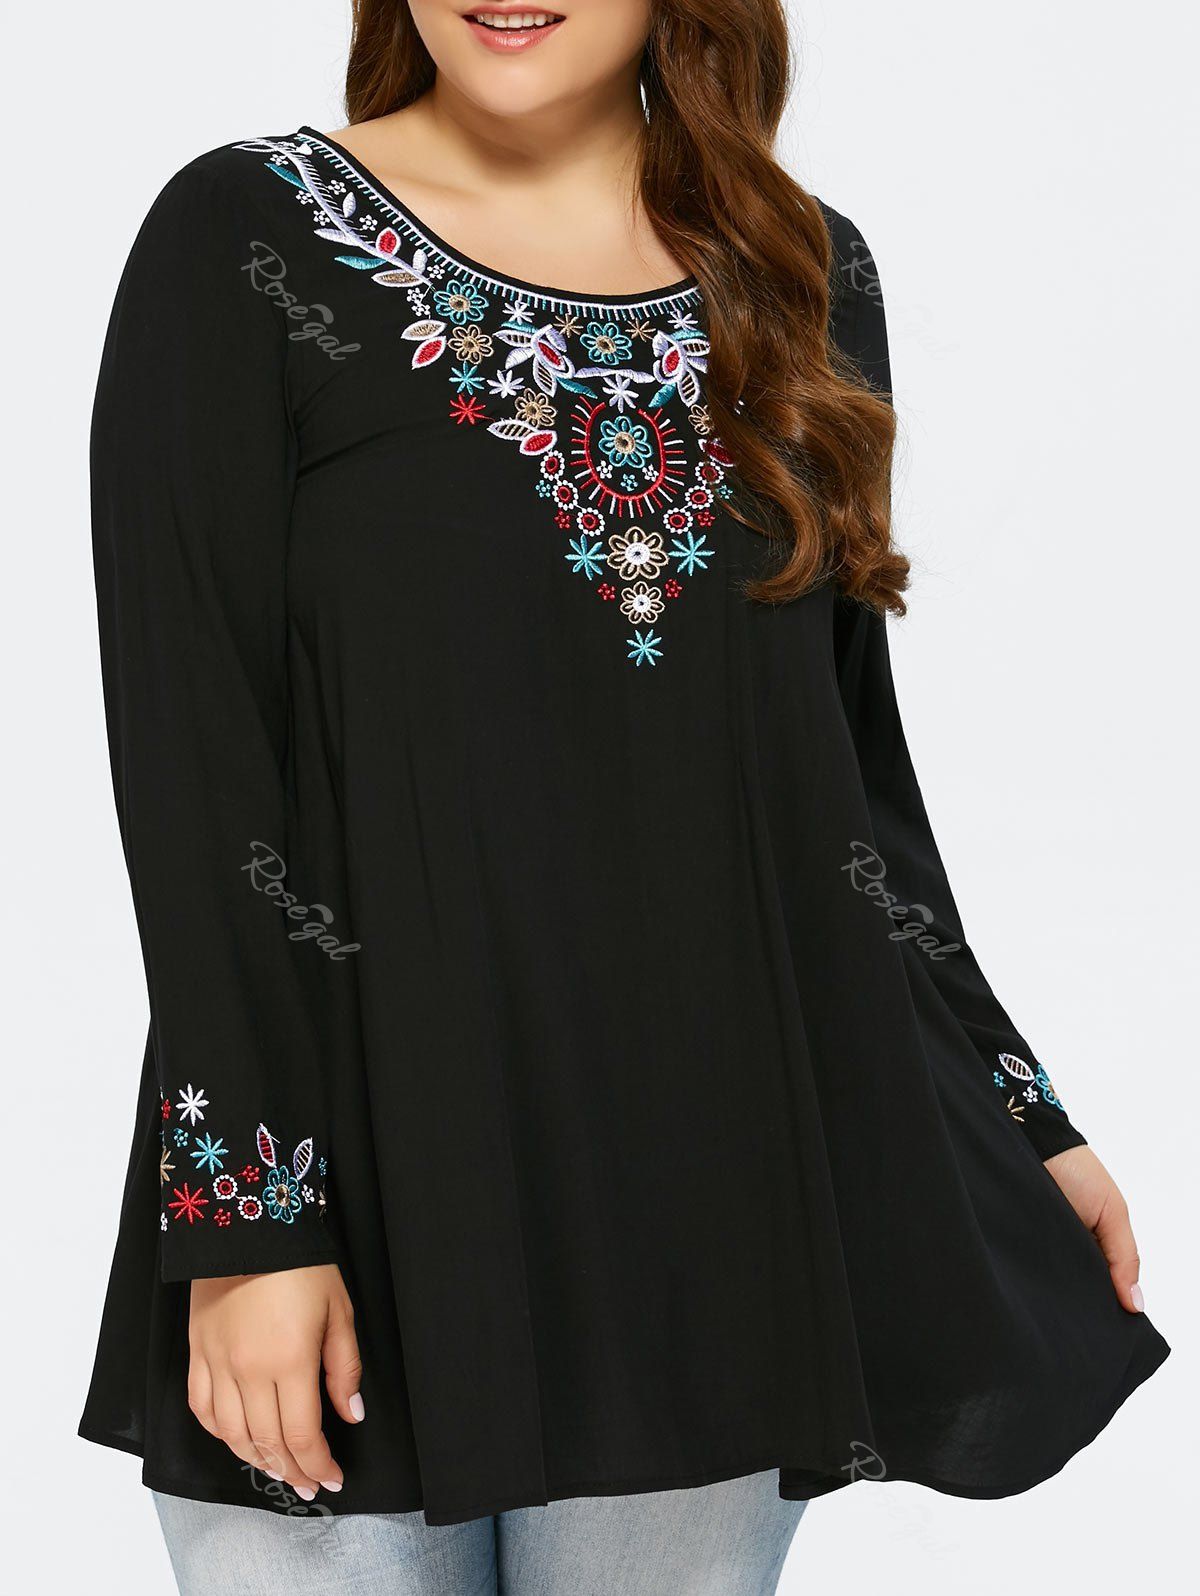 And skirts blouse necklines all designs plus size for women